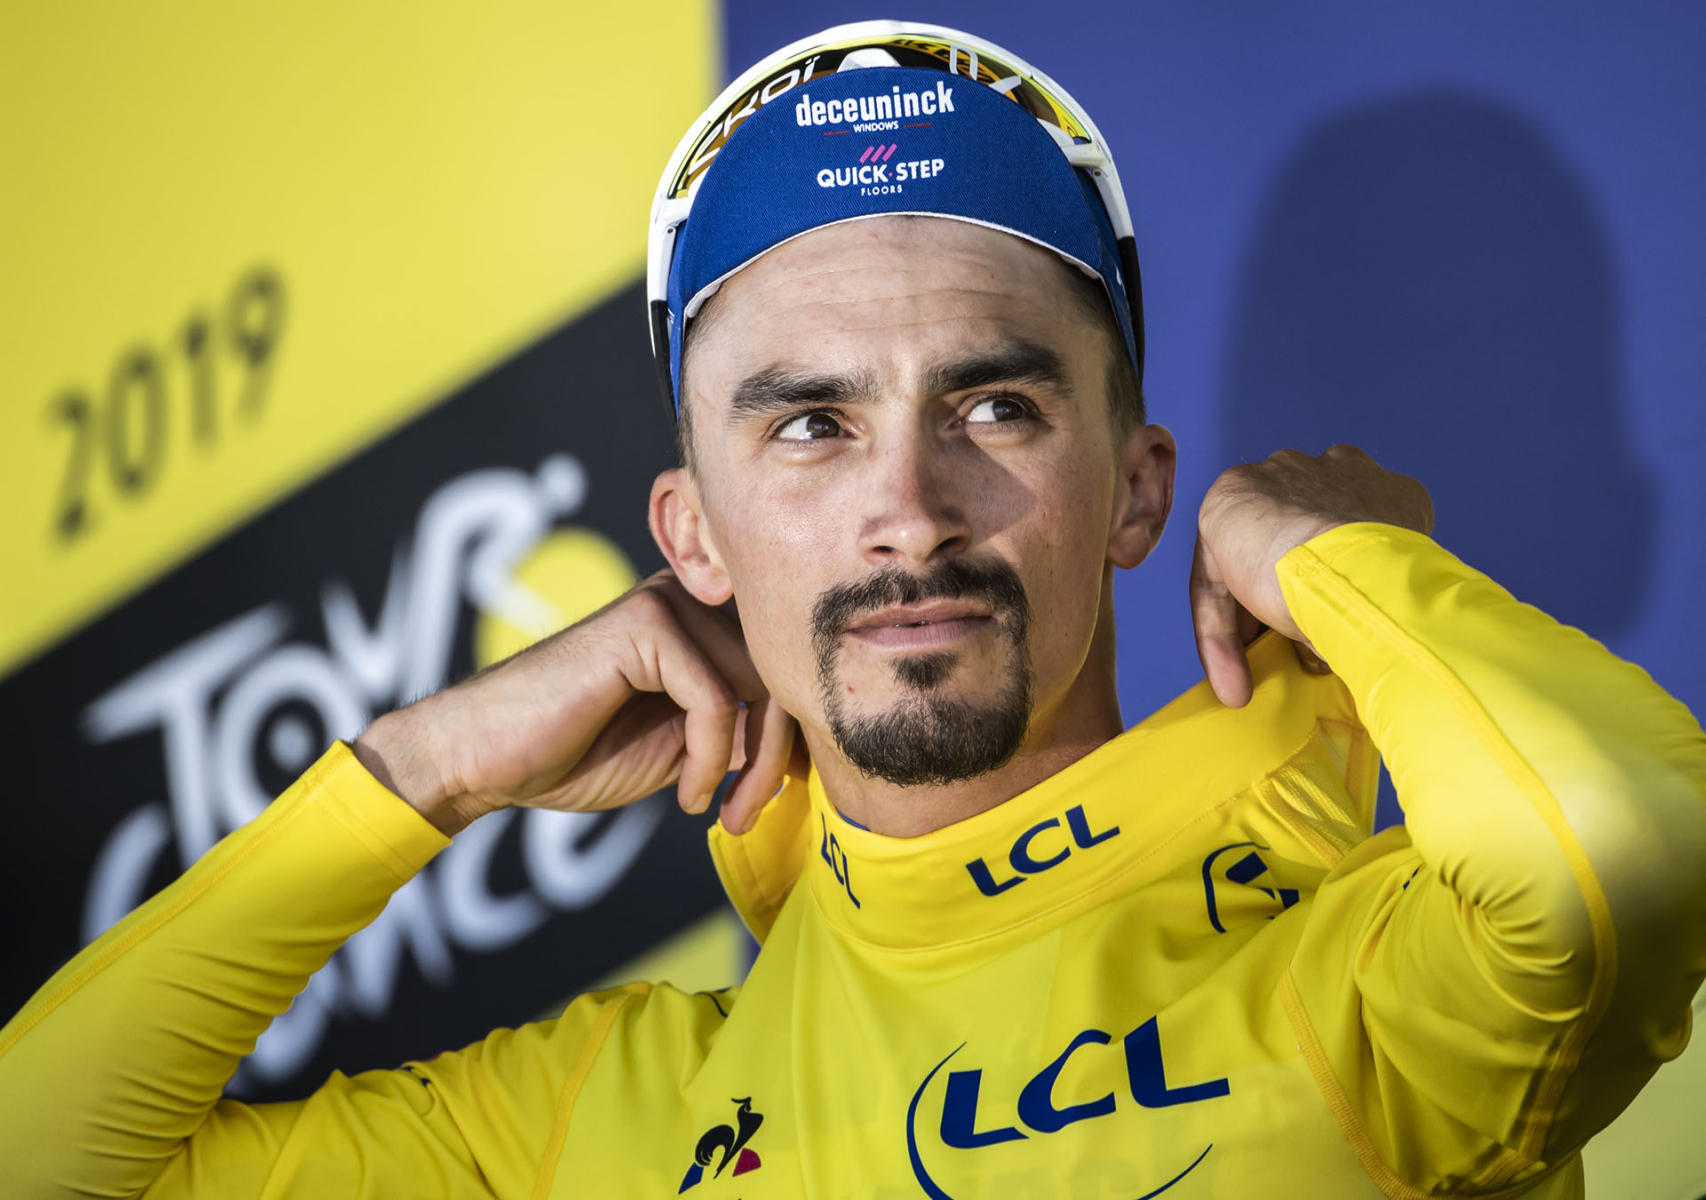 Tour de France 2019 - Stage Four - Julian Alaphilippe in the maillot jaune